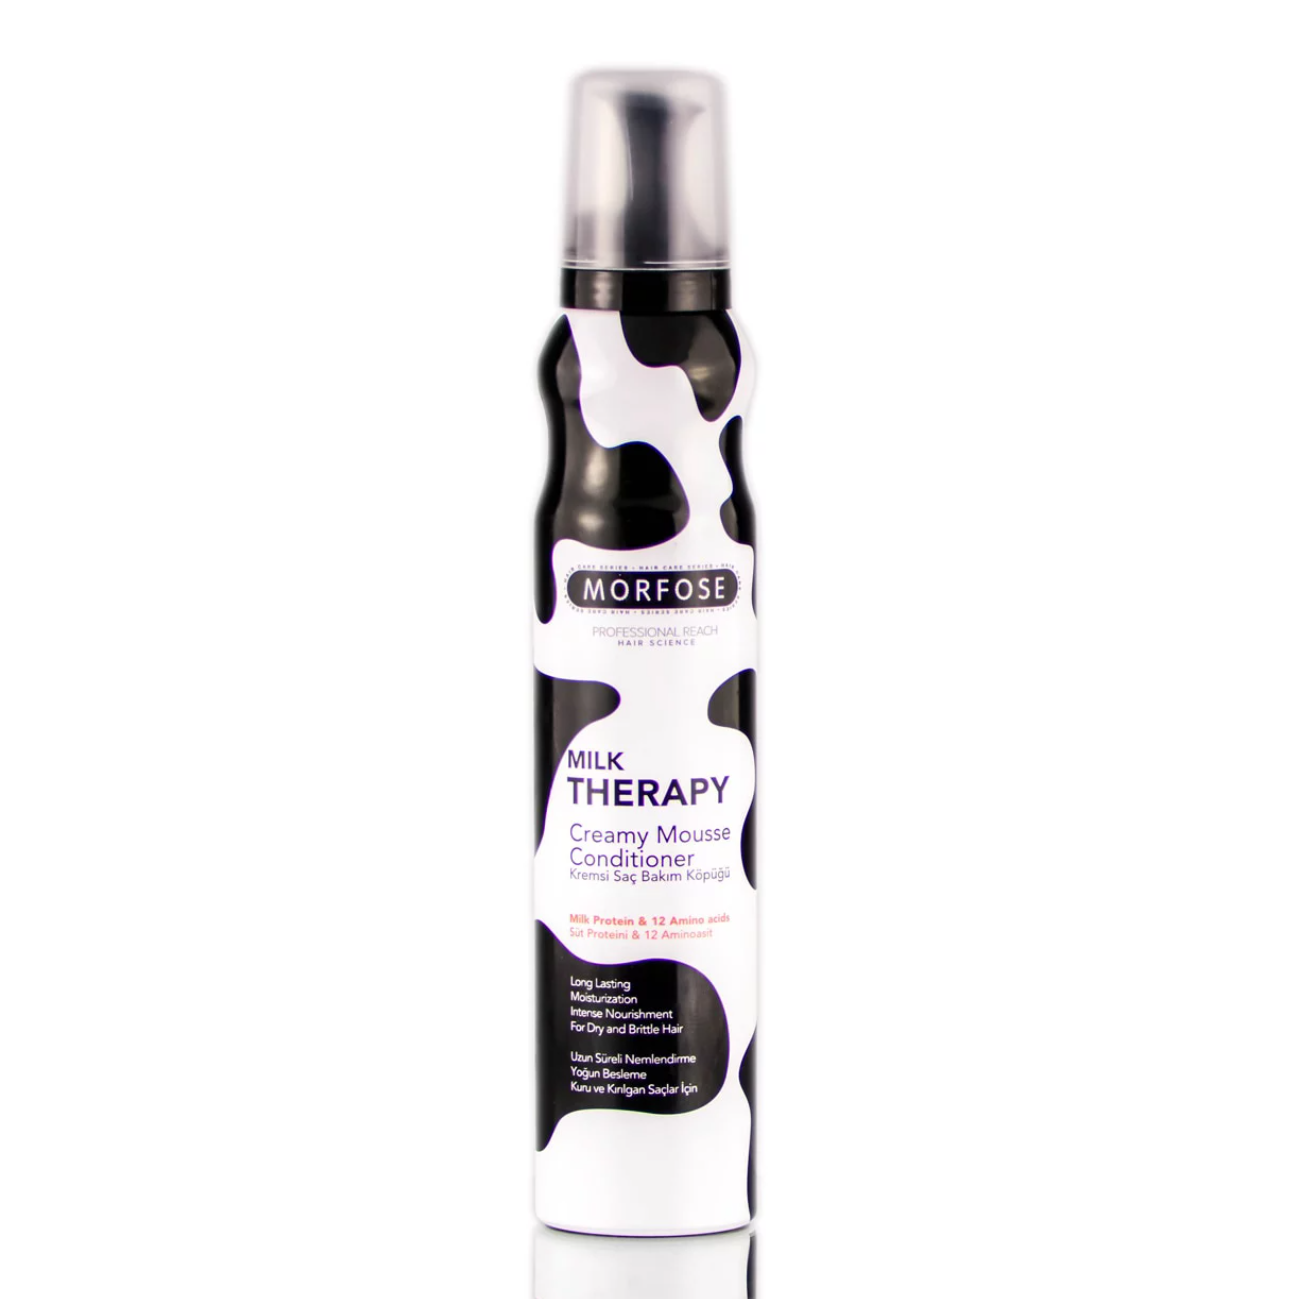 Morfose Milk Therapy Creamy Mousse Leave in